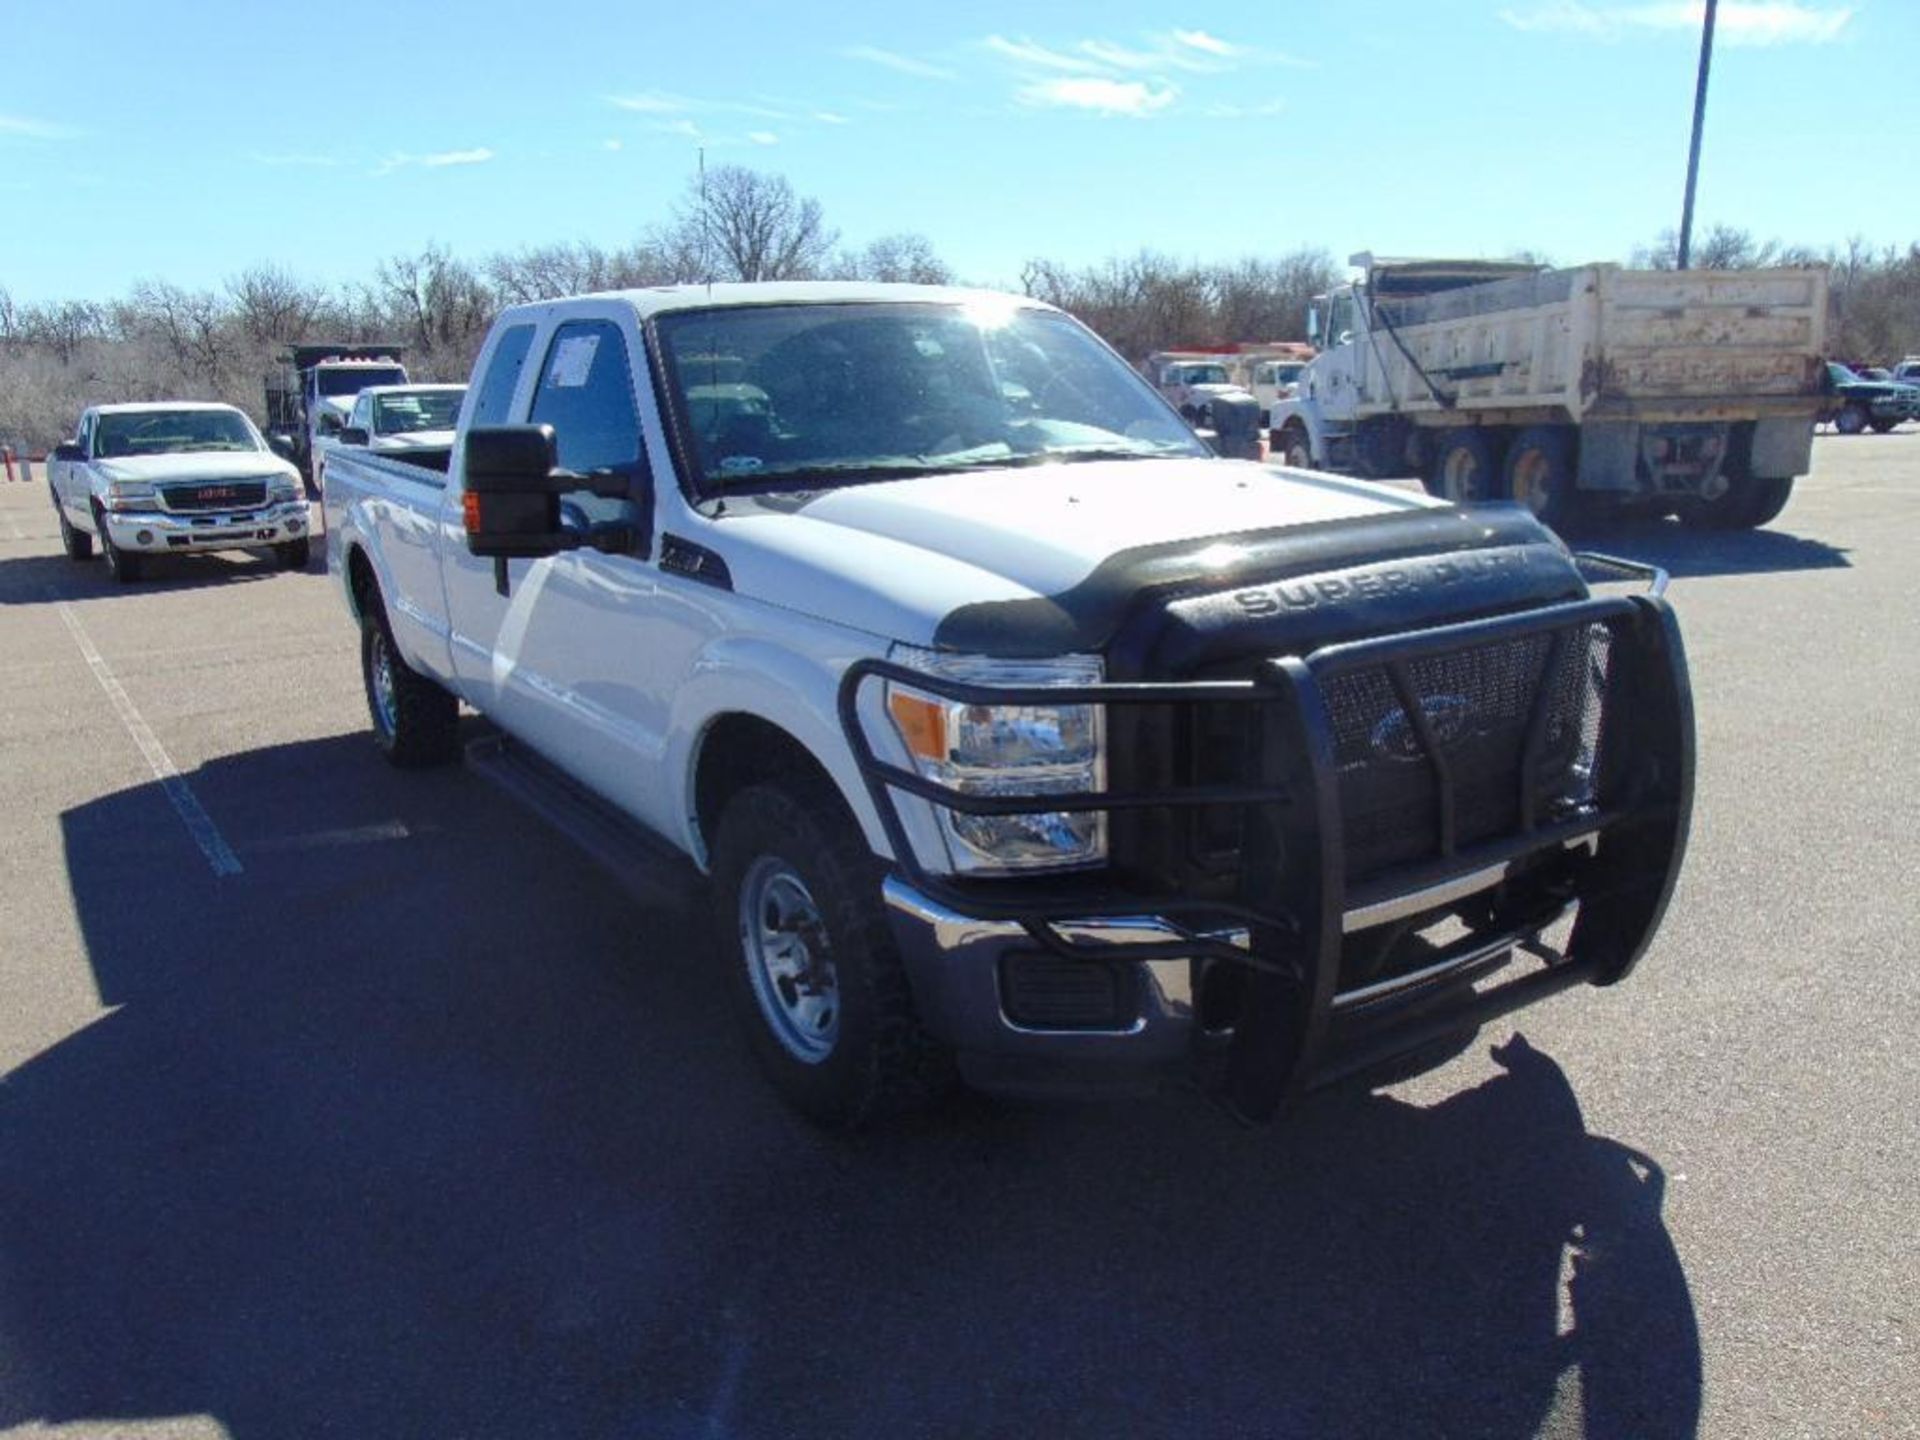 2011 Ford F250 ext cab Pickup s/n 1ft7x2a6xbec95350, v8 gas eng,auto trans, od reads 241498 miles - Image 3 of 3